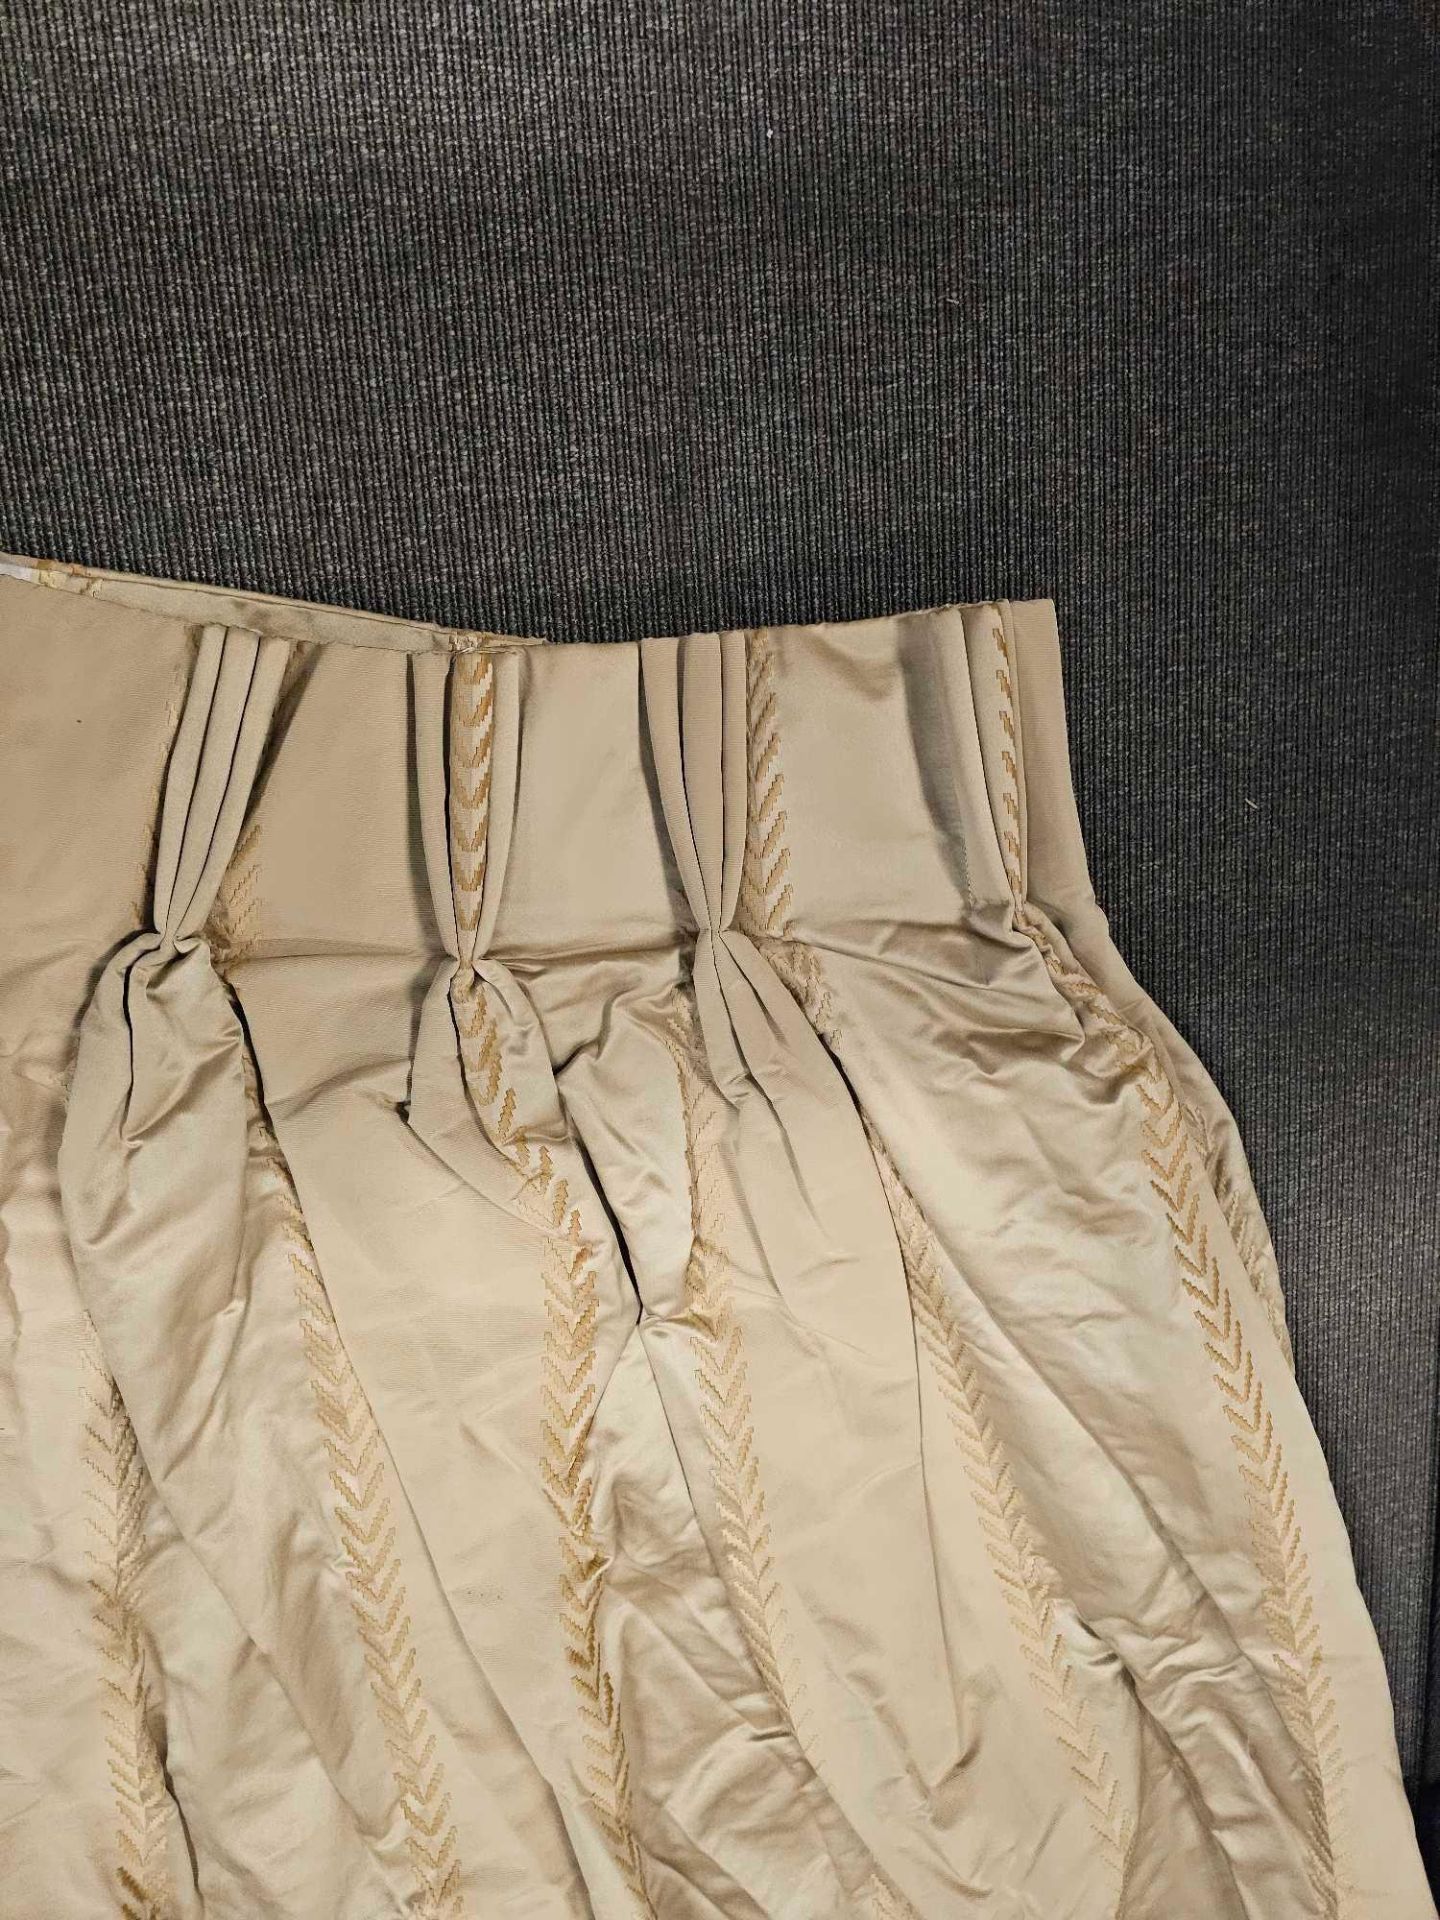 Single Cream And Silver Silk Drapes Brown Piping Arrow Pattern Size -cm 95 x 262 Ref Dorch 80 Single - Image 3 of 5